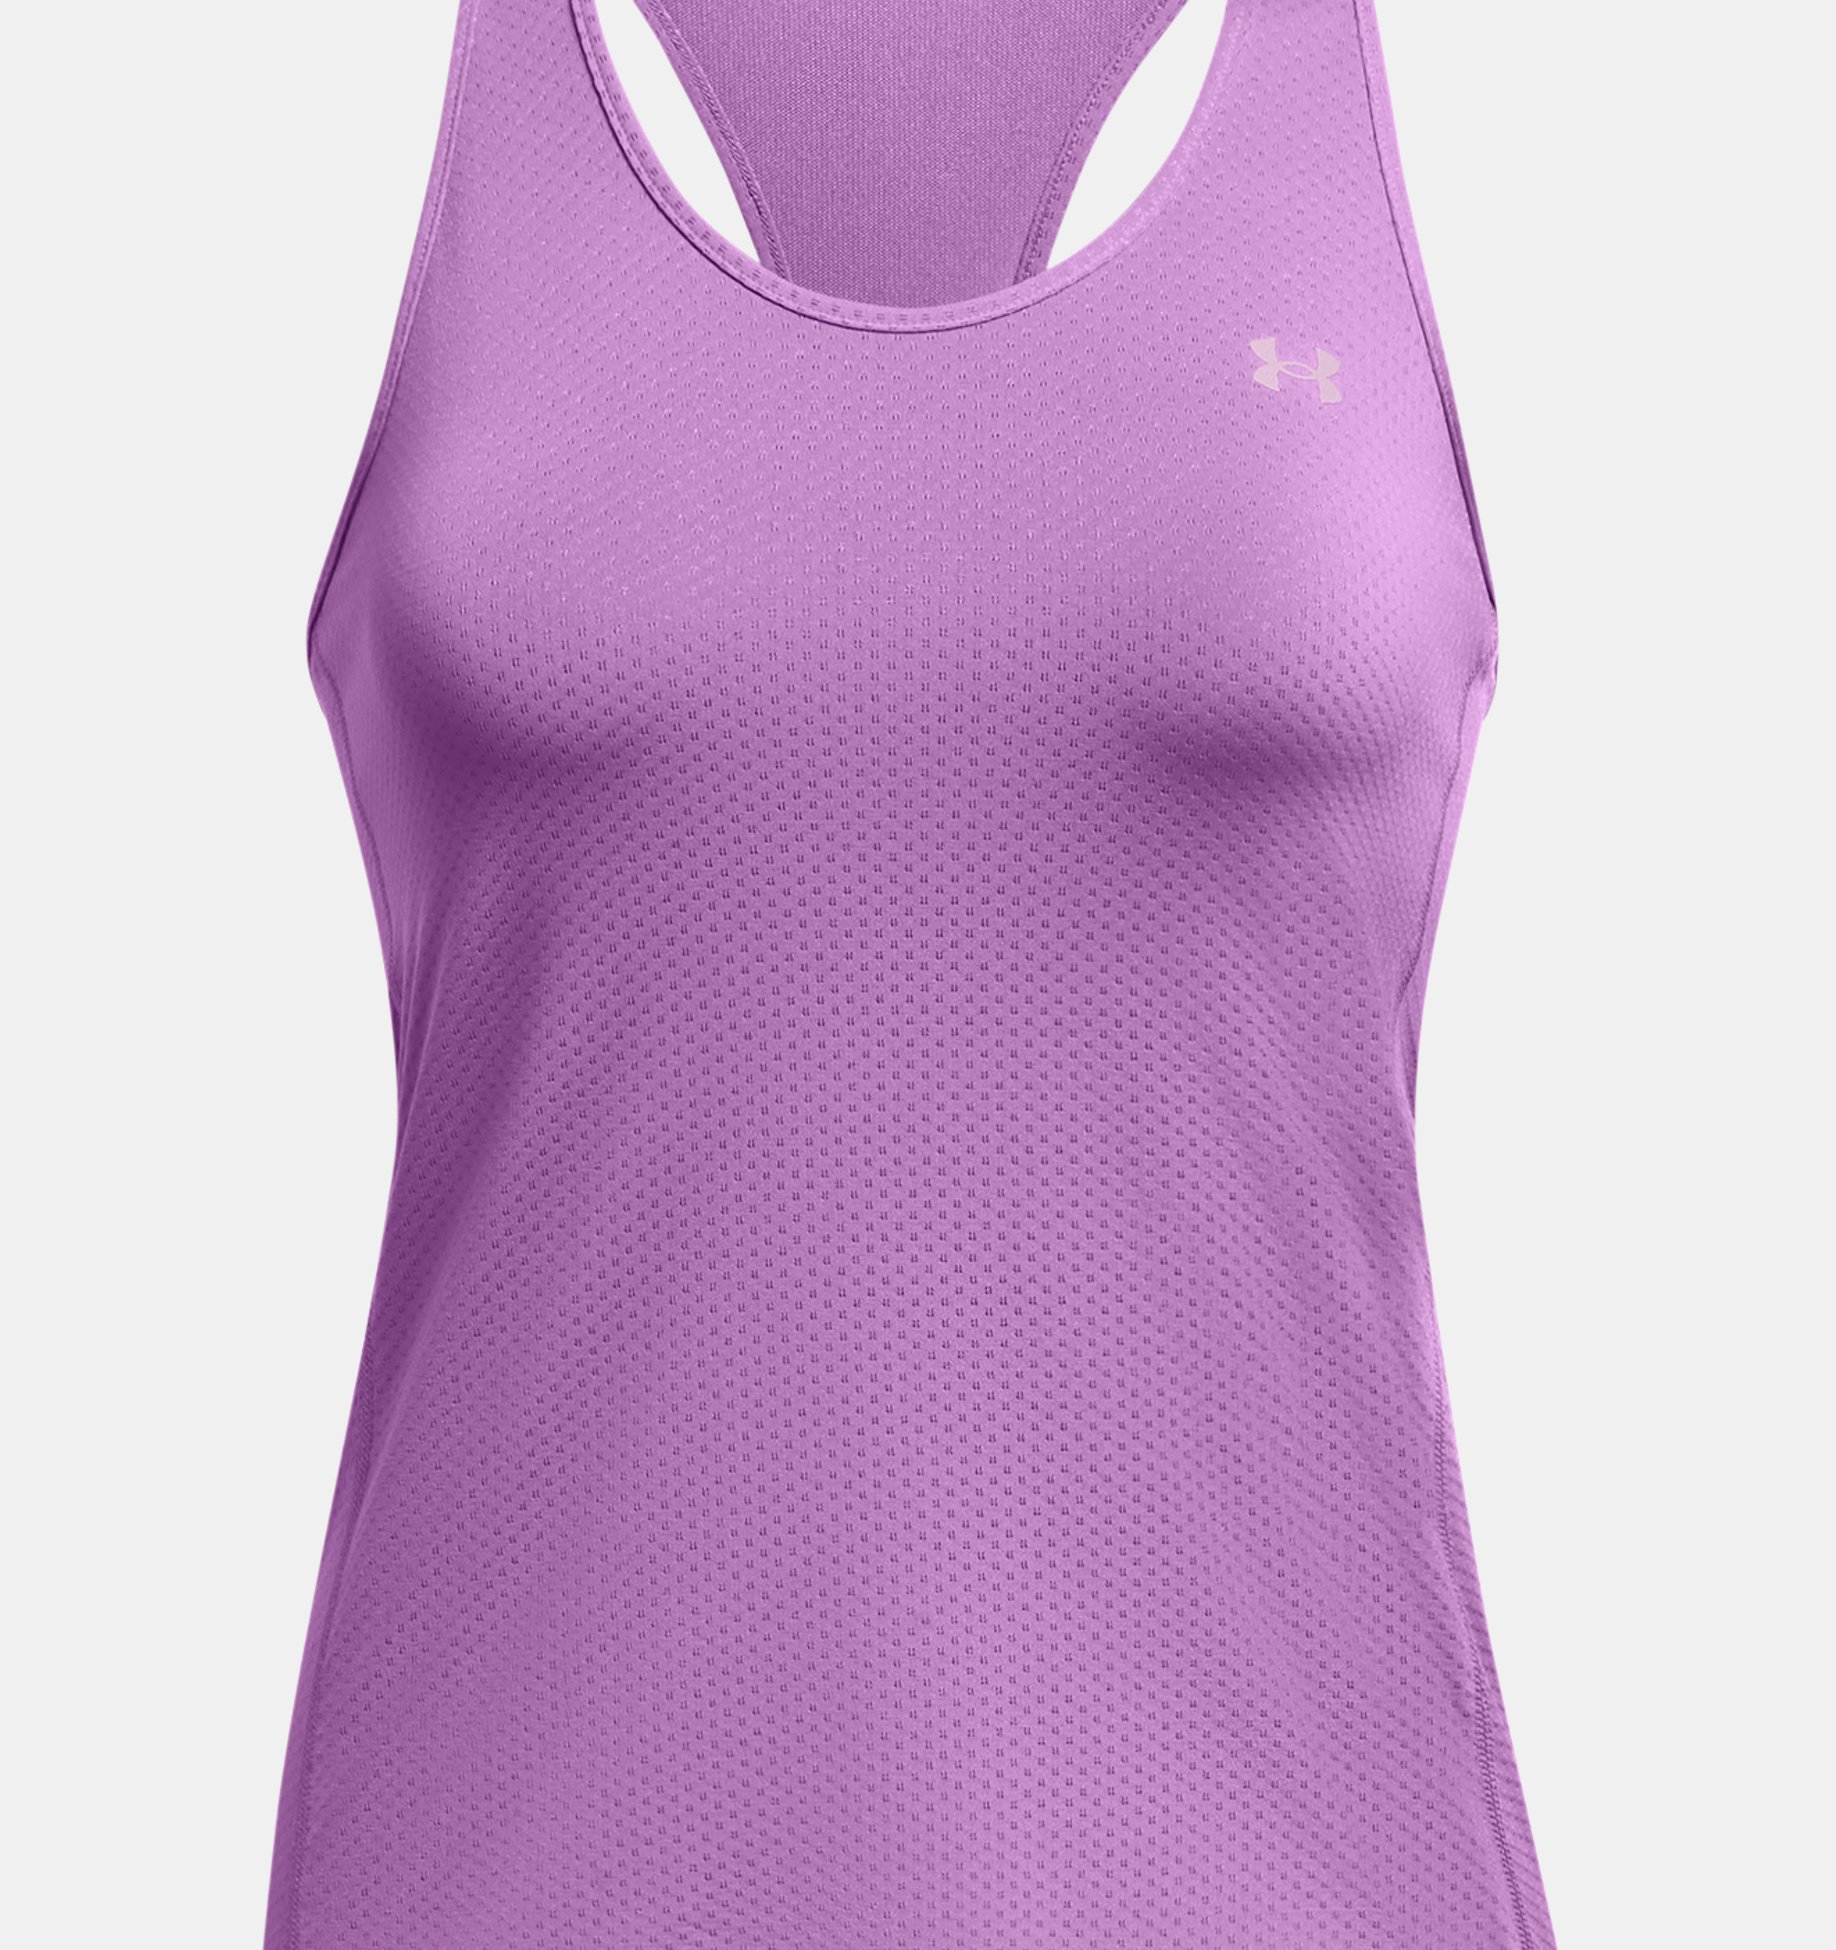 CANOTTA UNDER ARMOUR W STOCK RUNNING FUCSIA DONNA UNDER ARMOUR SPORTS WEAR